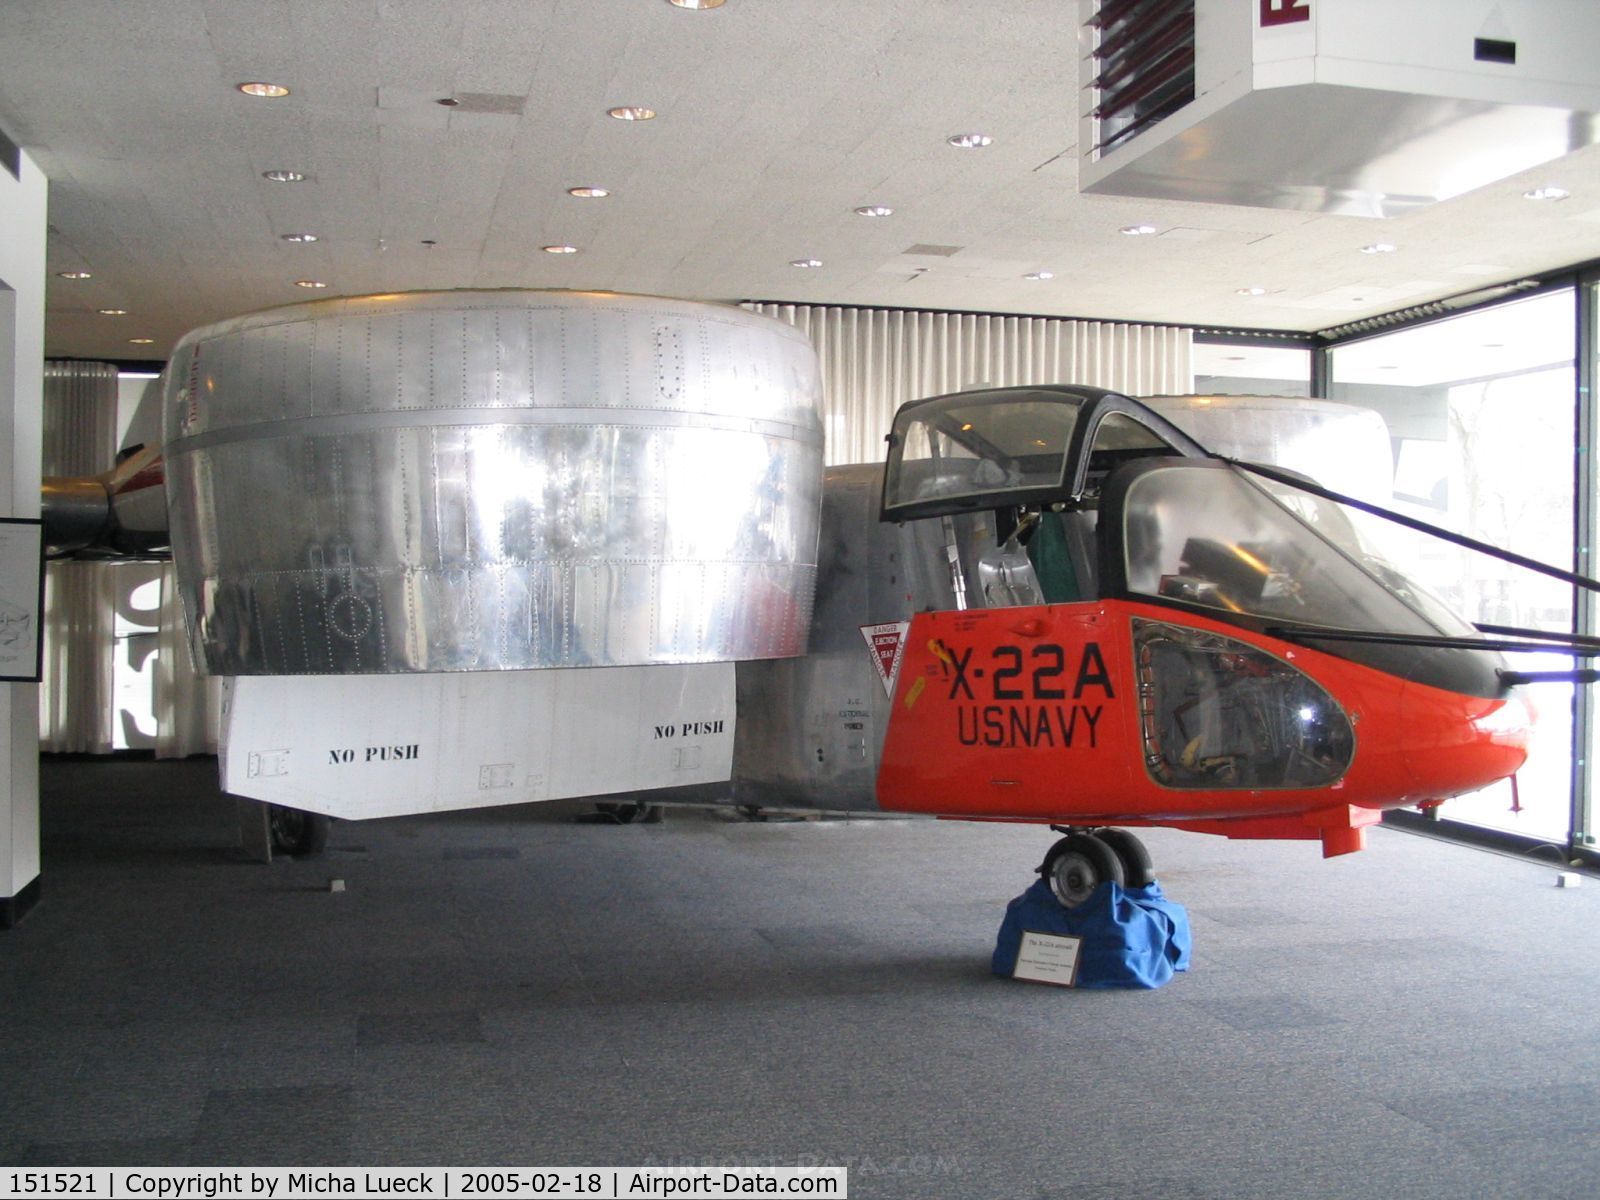 151521, 1966 Bell X-22A C/N 151521, Preserved at the Niagara Aerospace Museum